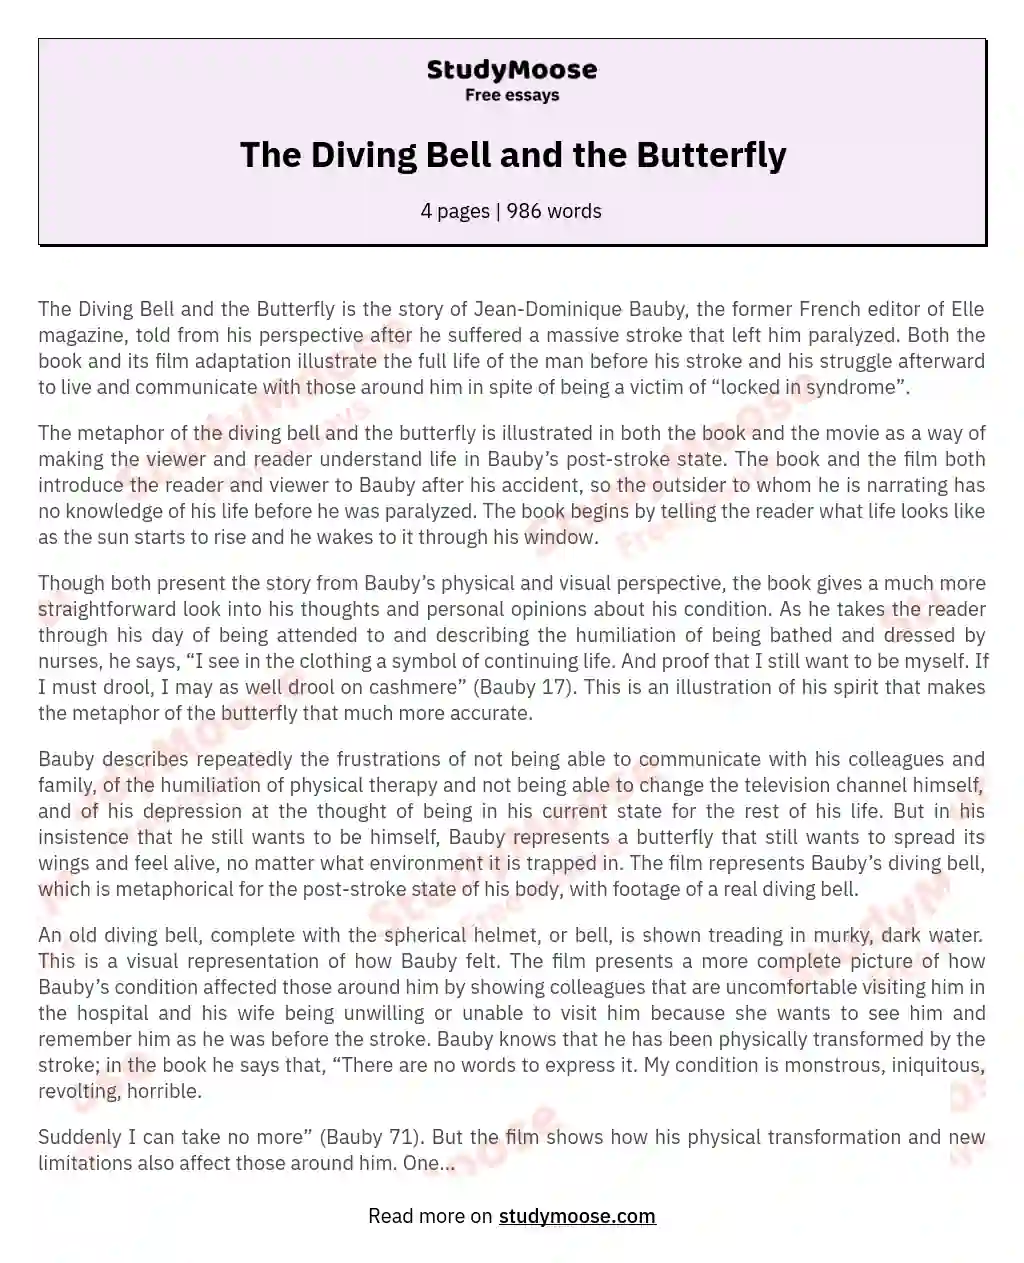 The Diving Bell and the Butterfly essay